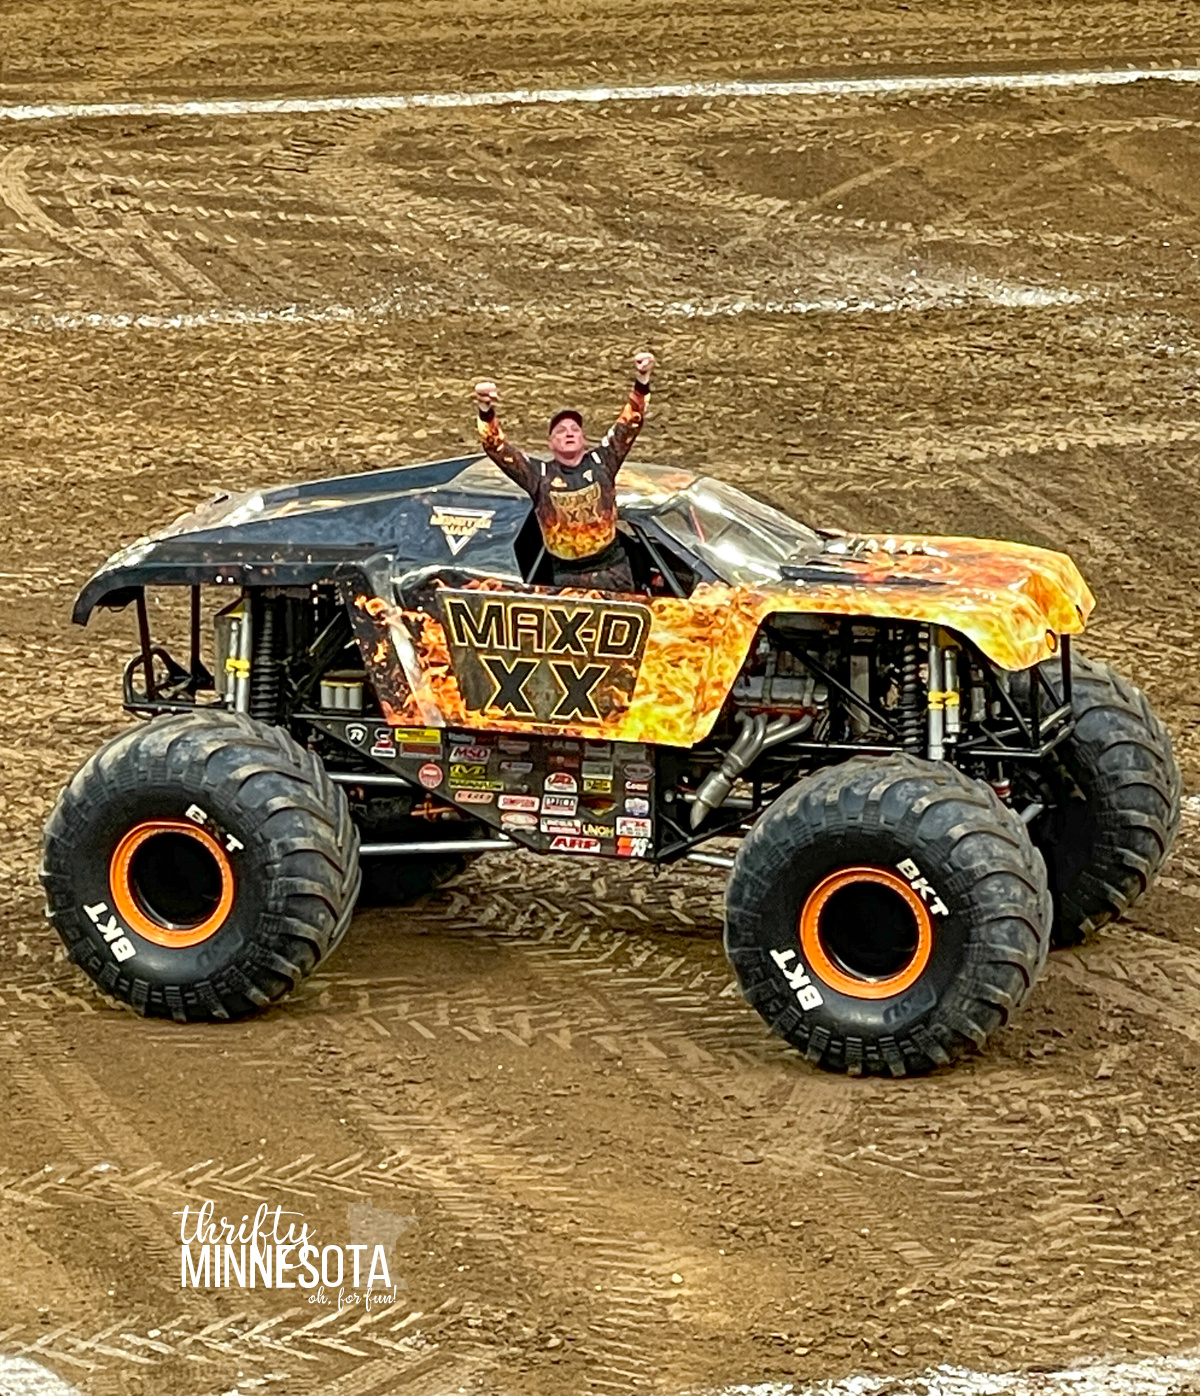 Monster Jam Tom Meents with Max-D truck.